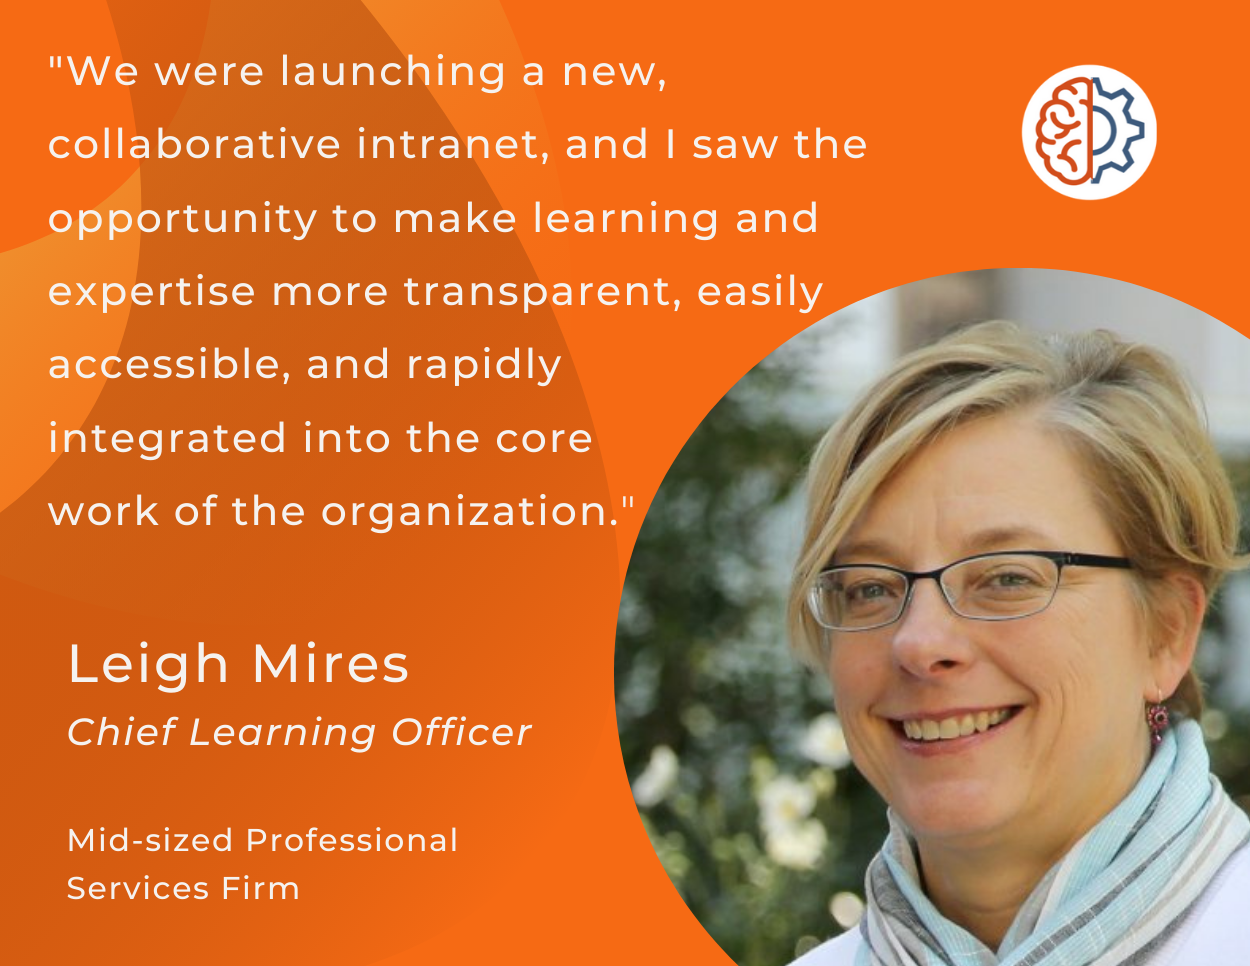 "We were launching a new, collaborative intranet, and I saw the opportunity to make learning and expertise more transparent, easily accessible, and rapidly integrated into the core work of the organization."